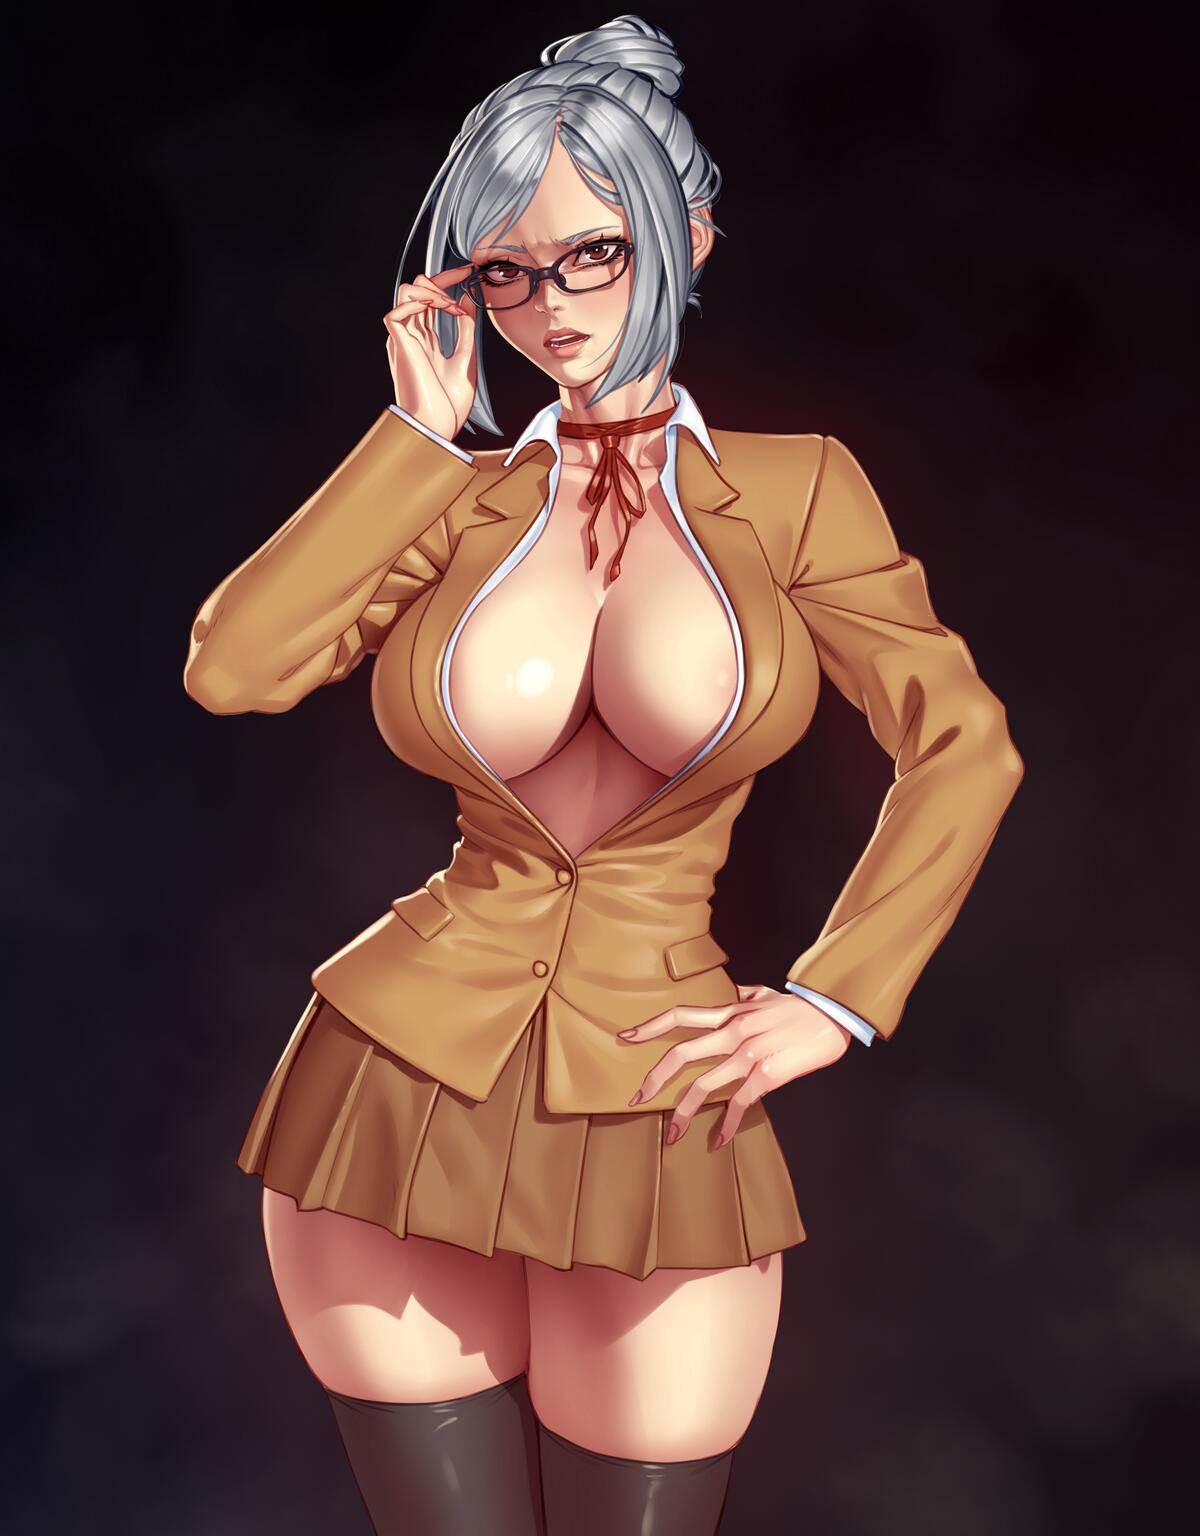 Drawing of a busty teacher with glasses